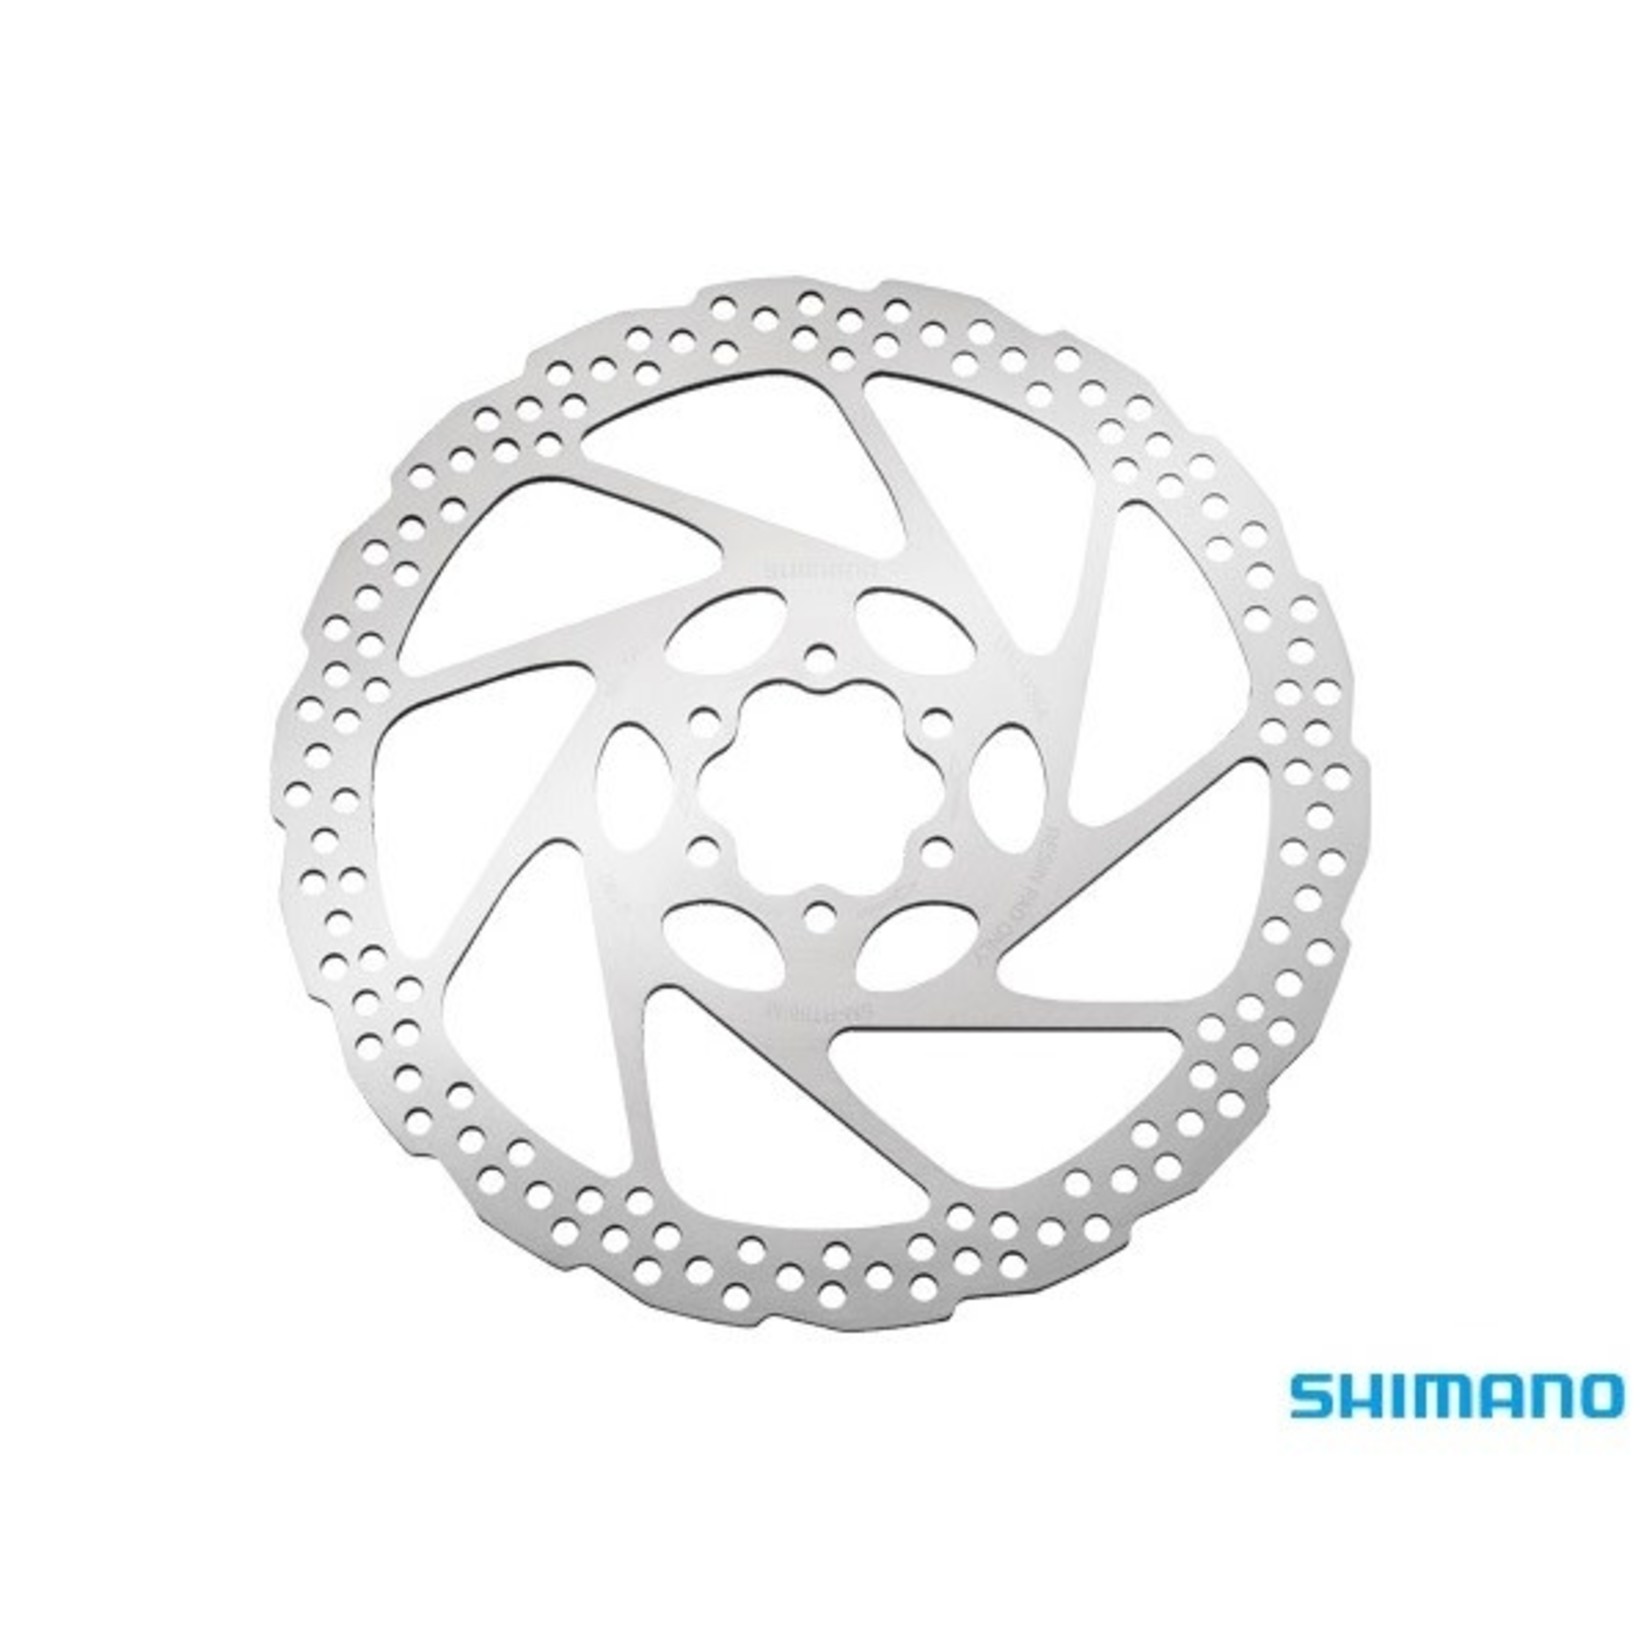 SHIMANO SHIMANO SM-RT56 DISC ROTOR 160mm DEORE 6-BOLT for RESIN PAD